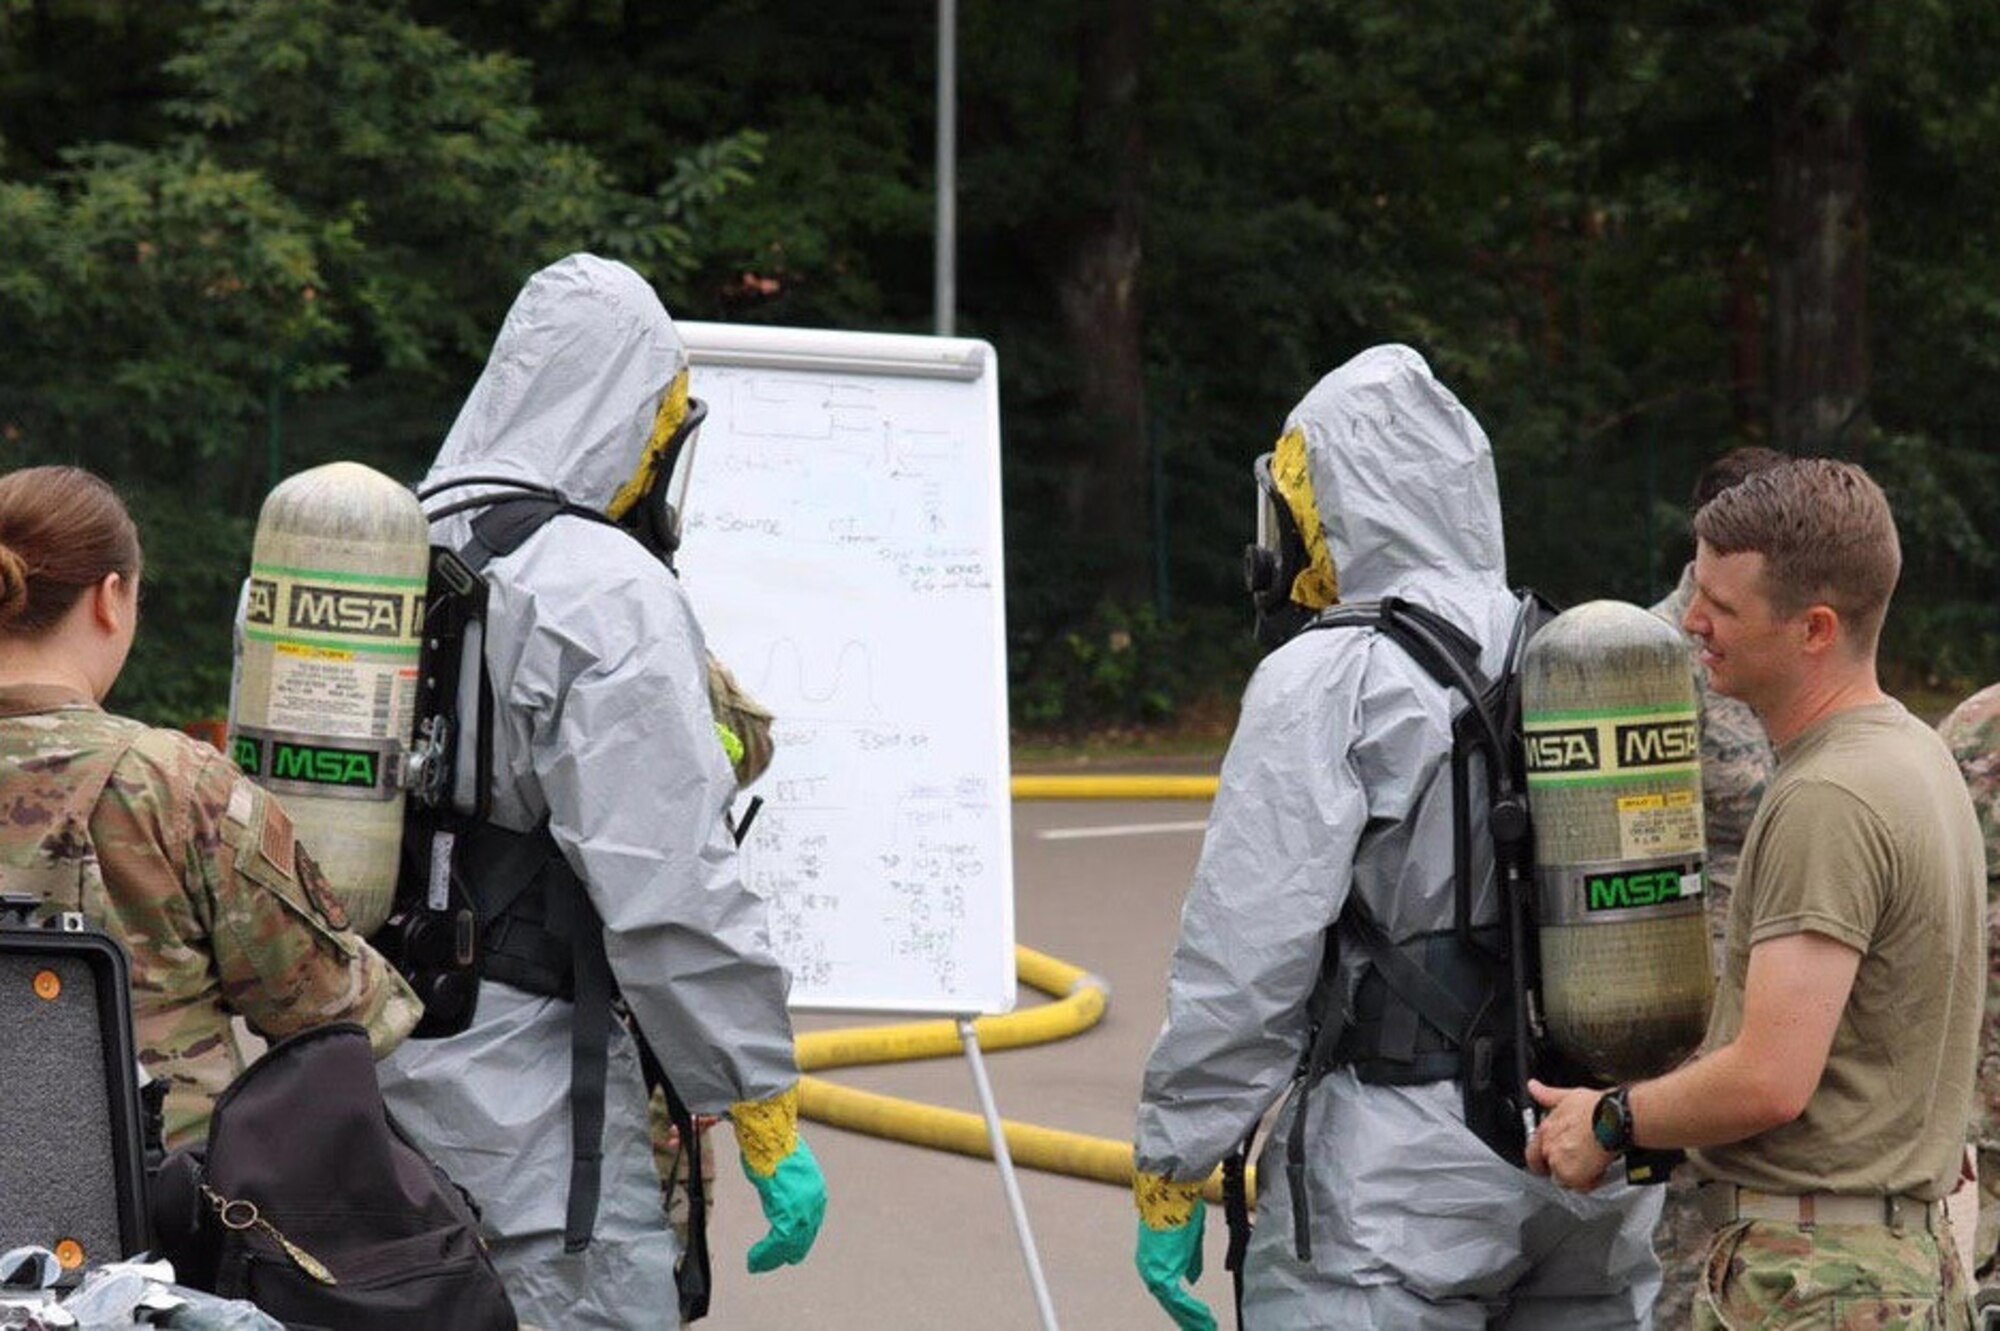 U.S. Air Force Airmen, assigned to the 786th Civil Engineer Squadron Emergency Management Logistics, review the team objectives before entry into a potentially contaminated area at Landstuhl Regional Medical Center, Germany, June 16, 2020.